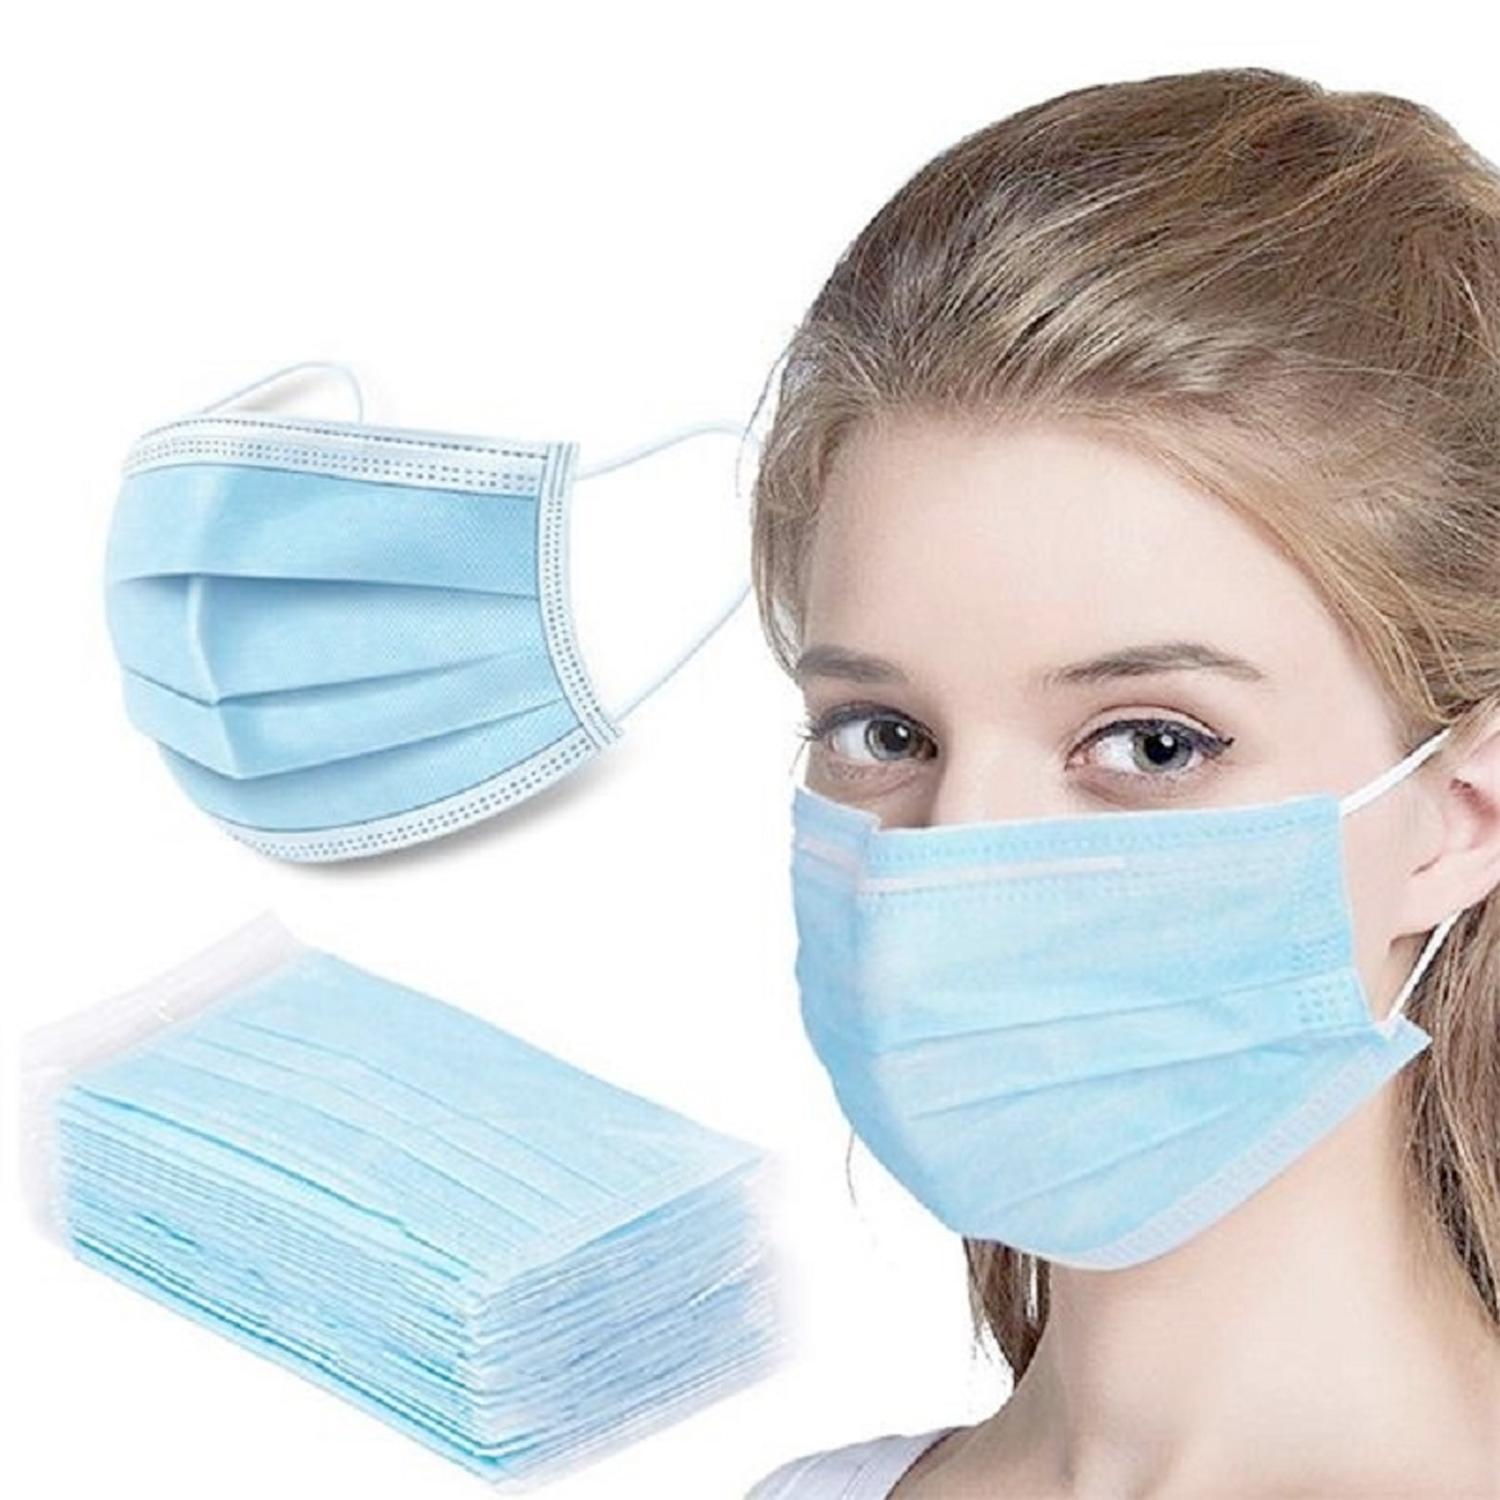 Disposable Face Mask Each Box Contains 50 Mask Seps